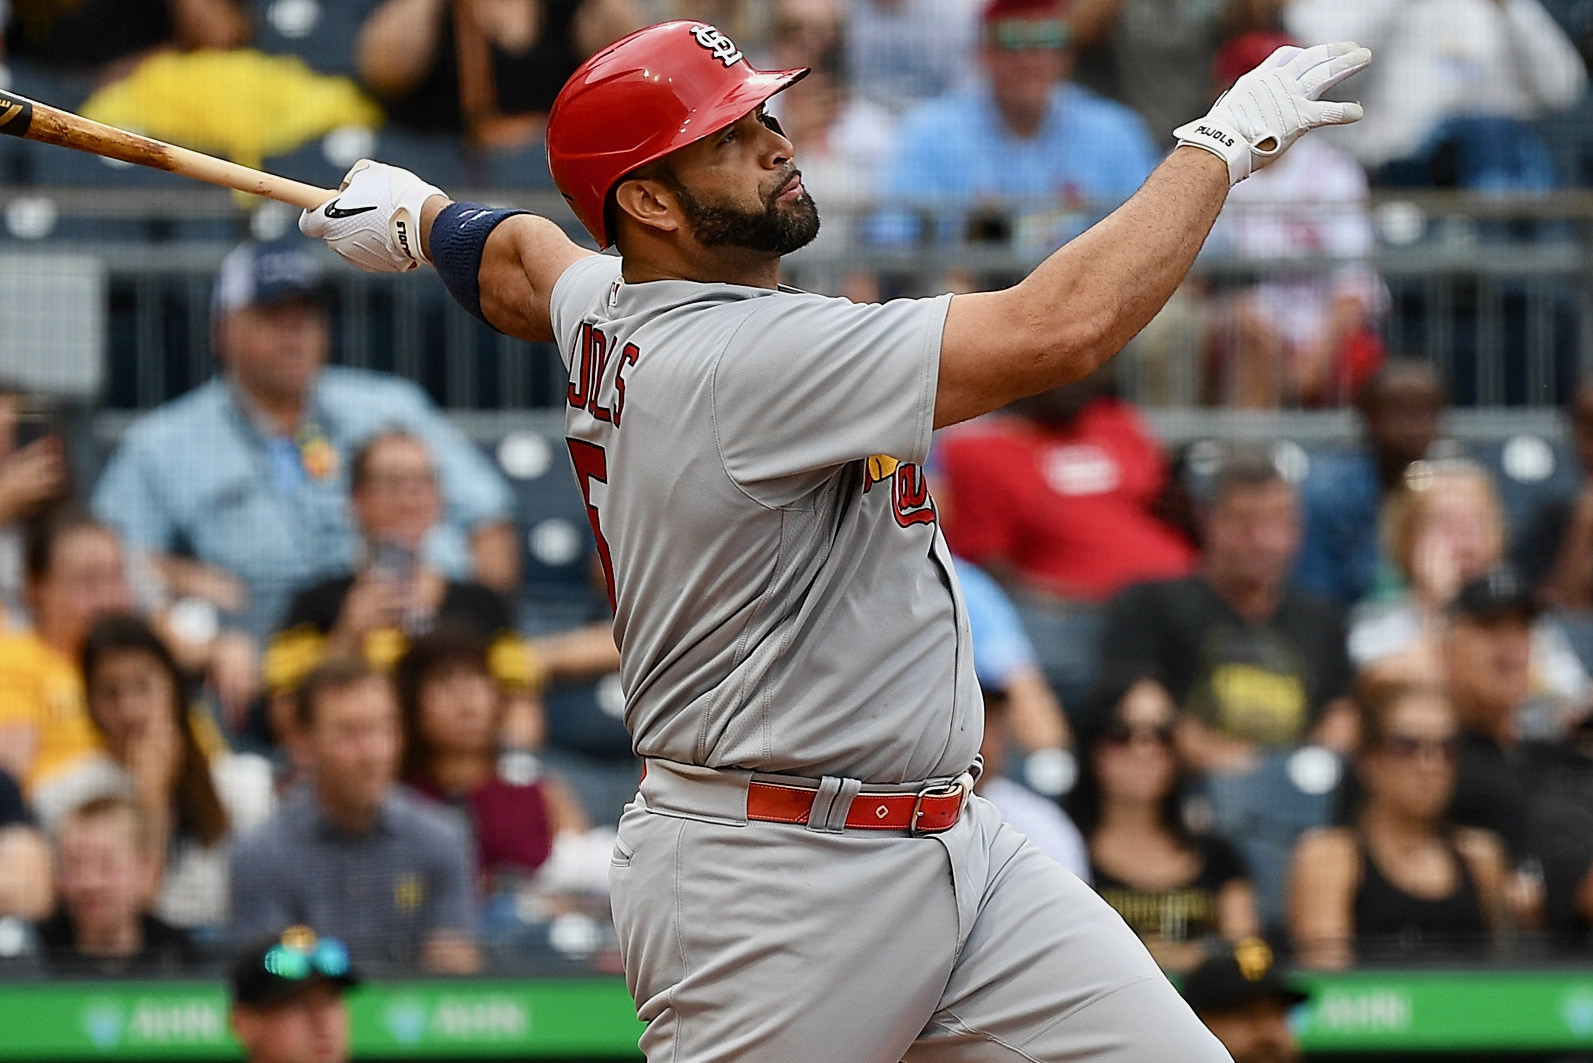 Albert Pujols' 700th home run: My view from the broadcast booth National  News - Bally Sports